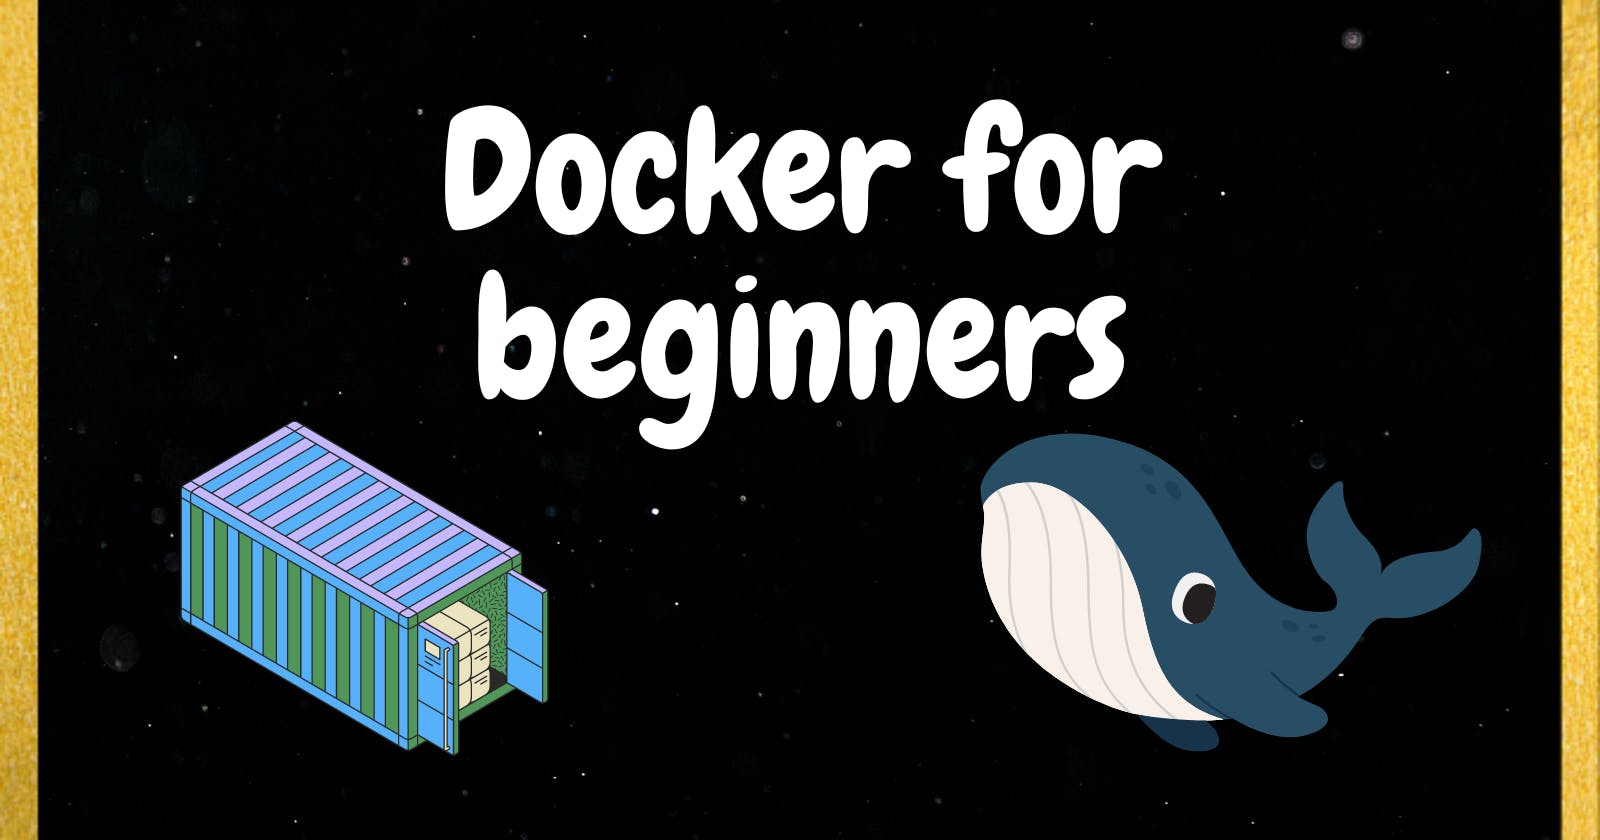 Getting started with Docker.